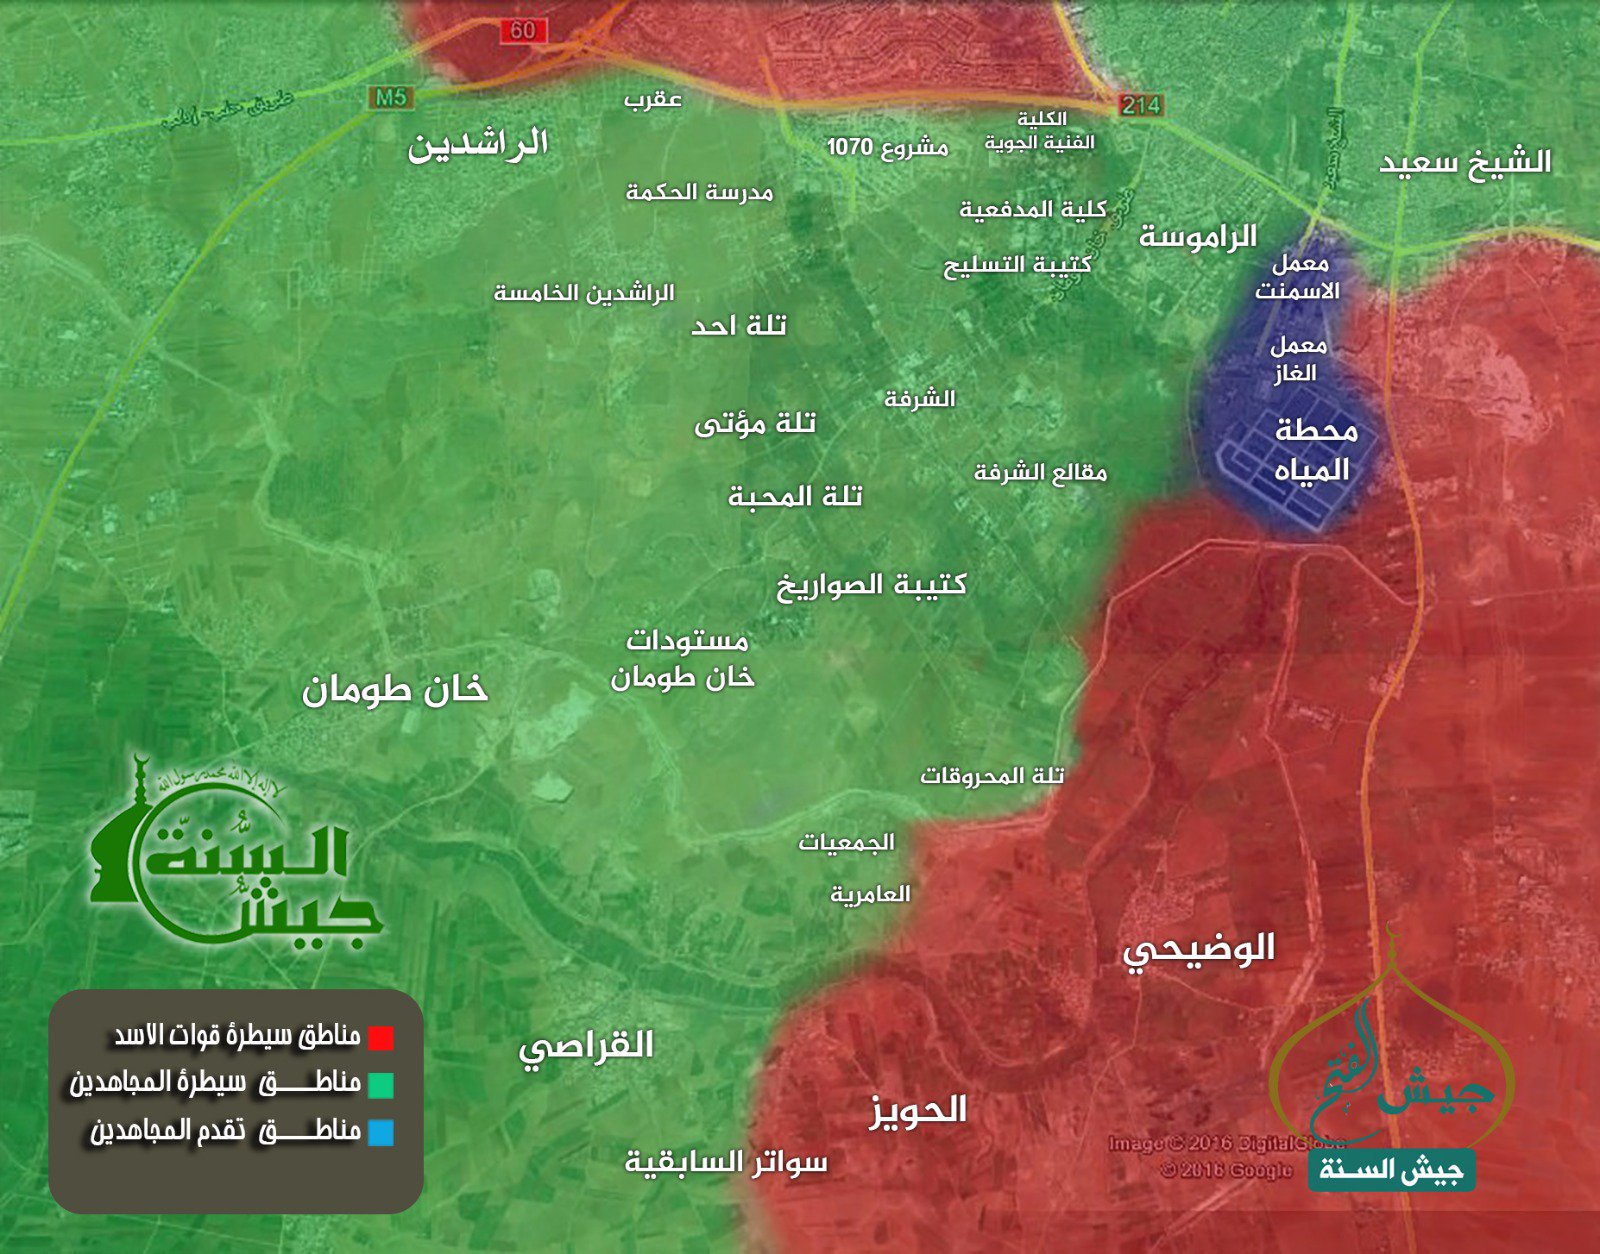 Overview of Military Situation in Aleppo City on August 14-15 (Maps, Photos)